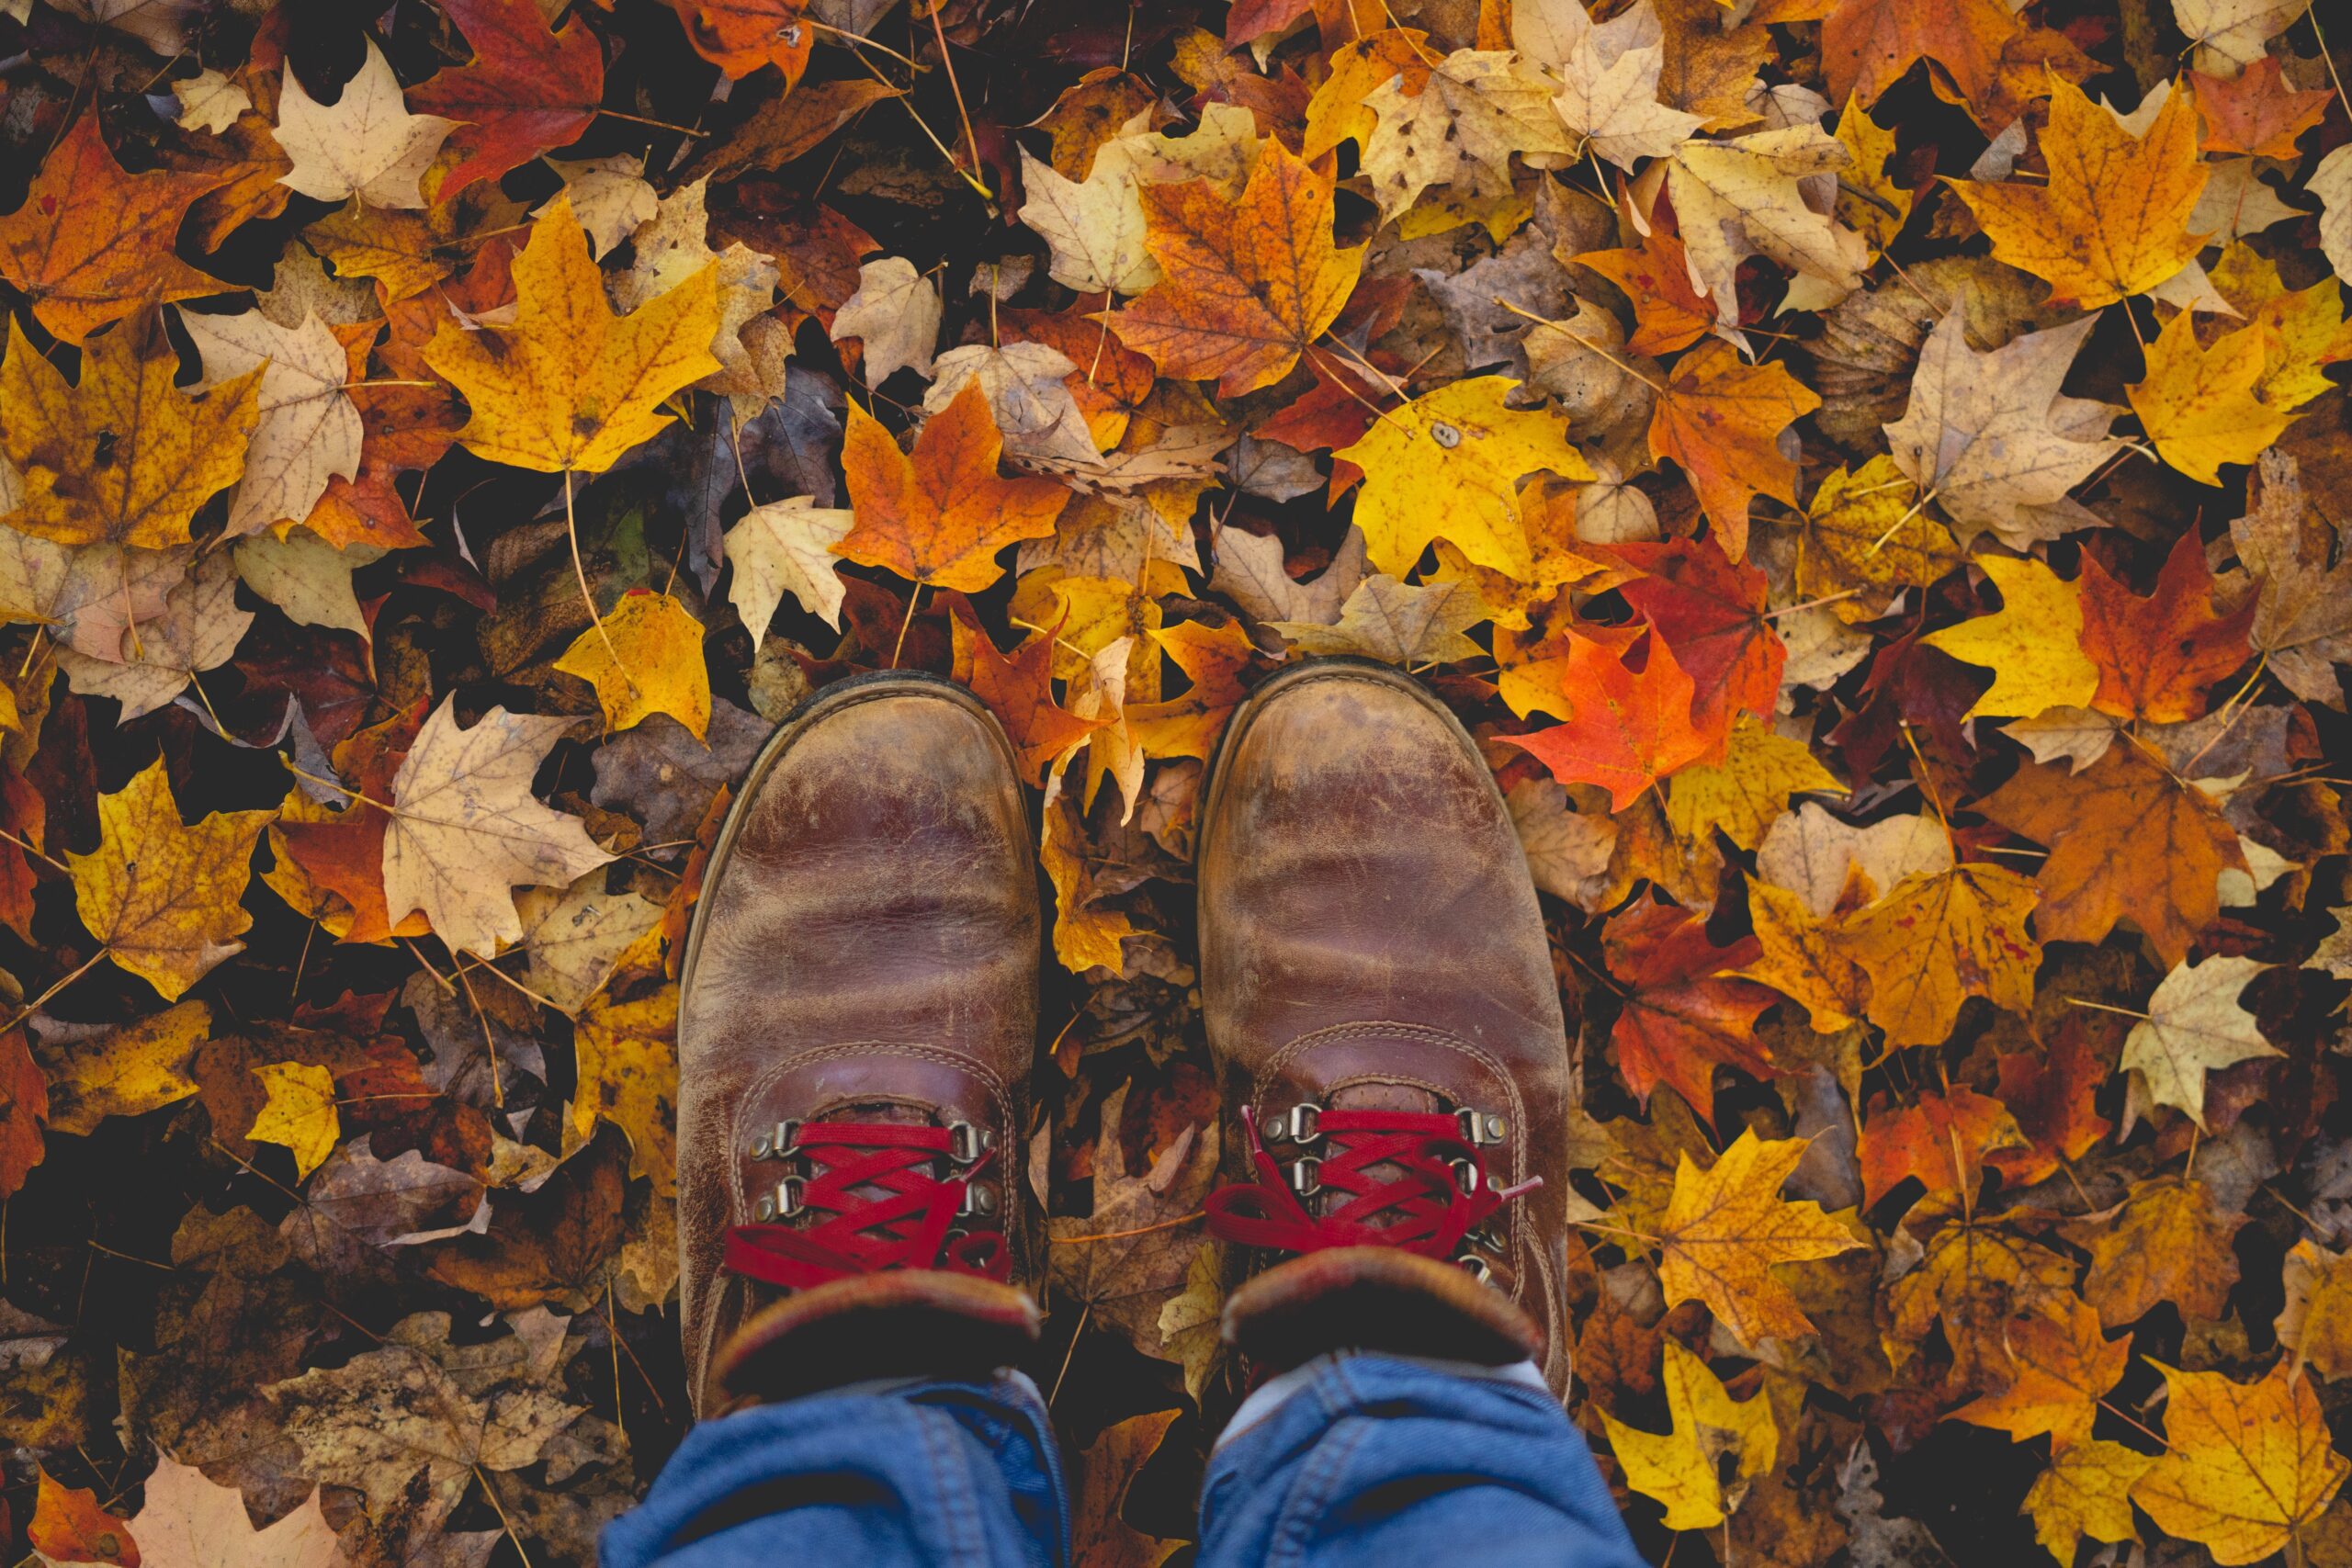 Feet standing on autumn leaves on the ground